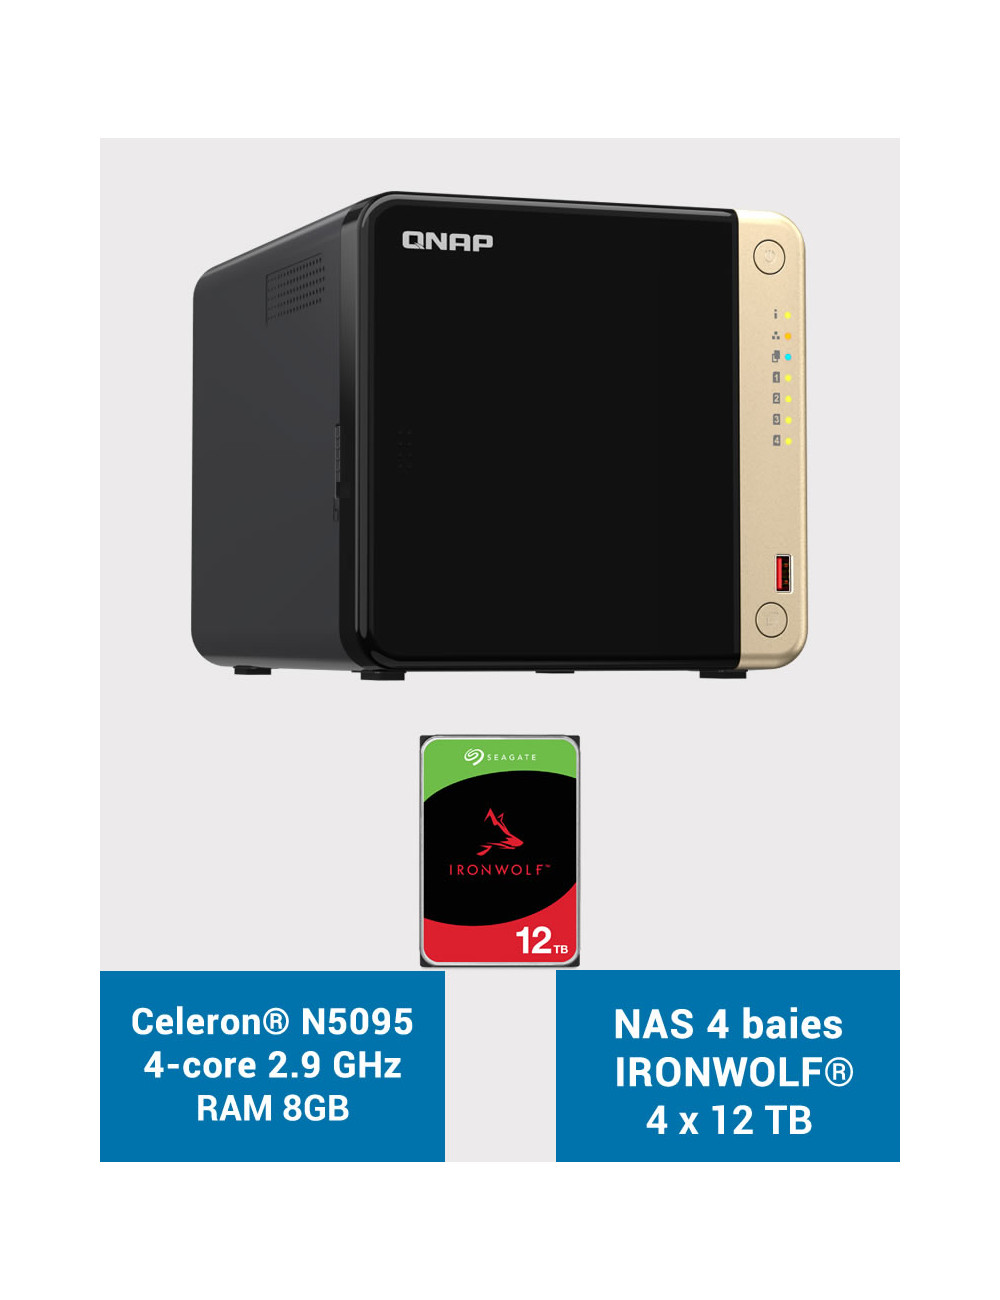 QNAP TS-464 8GB Serveur NAS 4 baies IRONWOLF 48To (4x12To)